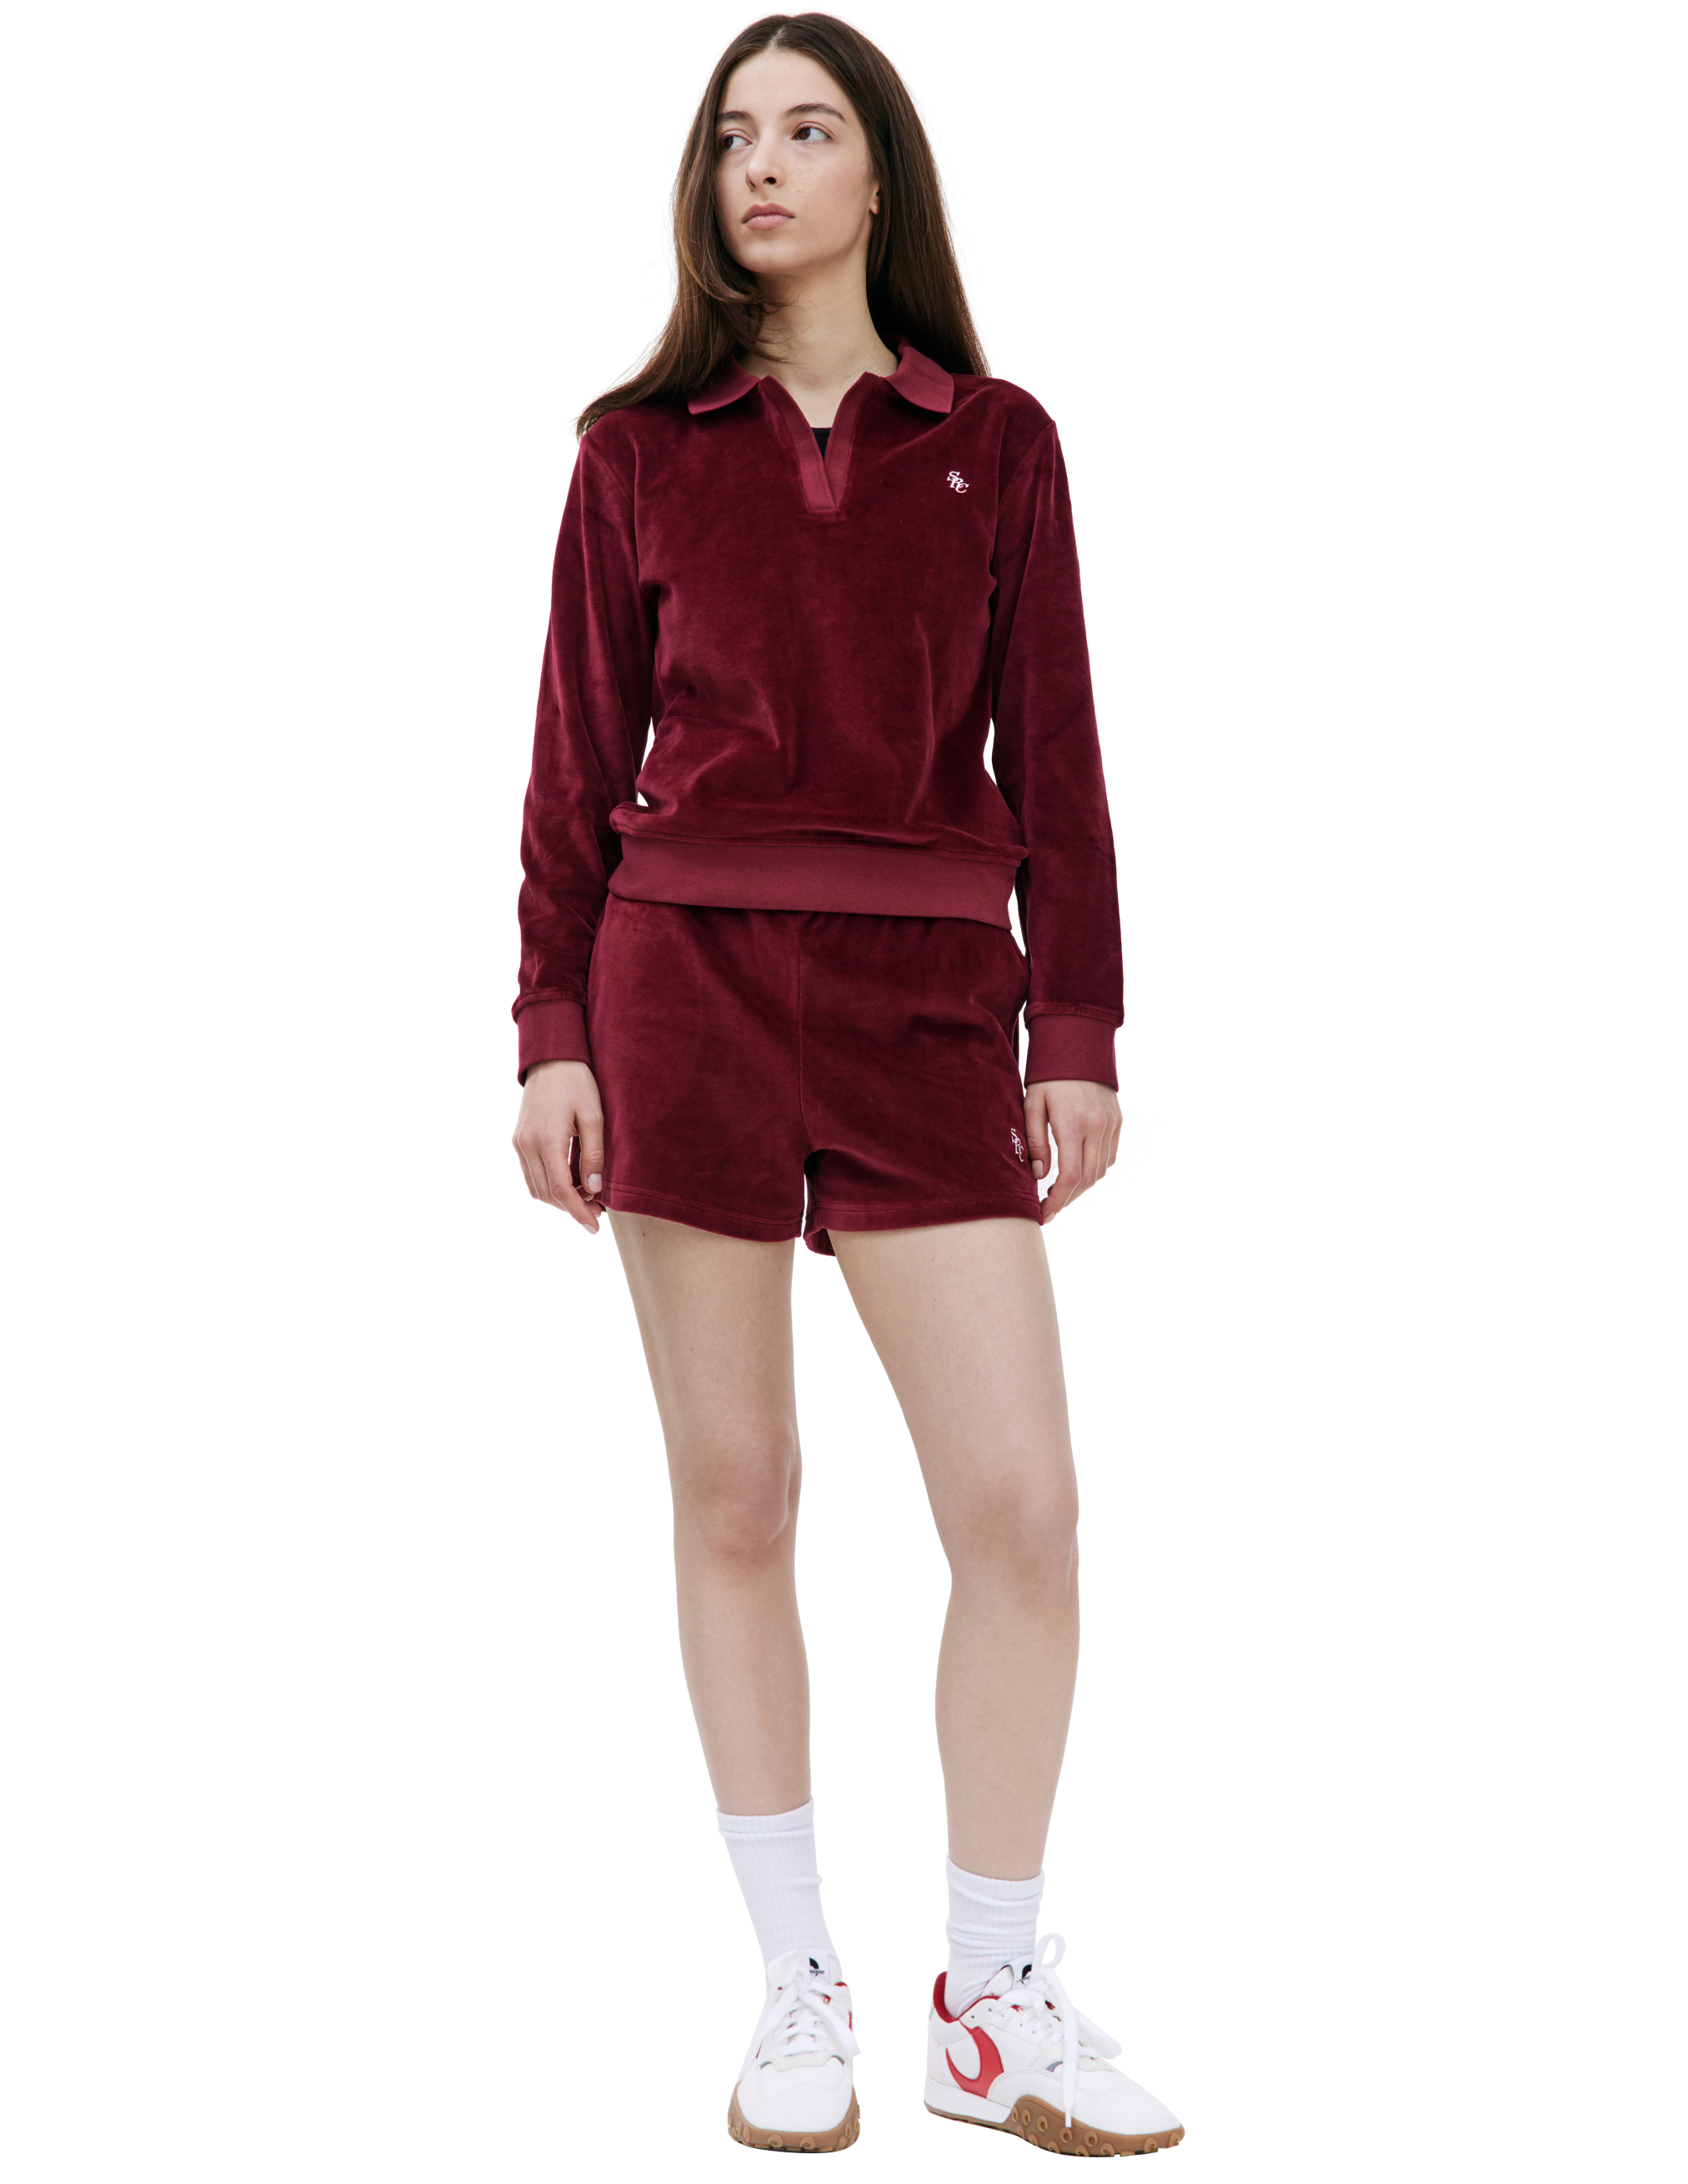 Shop Sporty And Rich Src Velour Longsleeve Polo In Burgundy